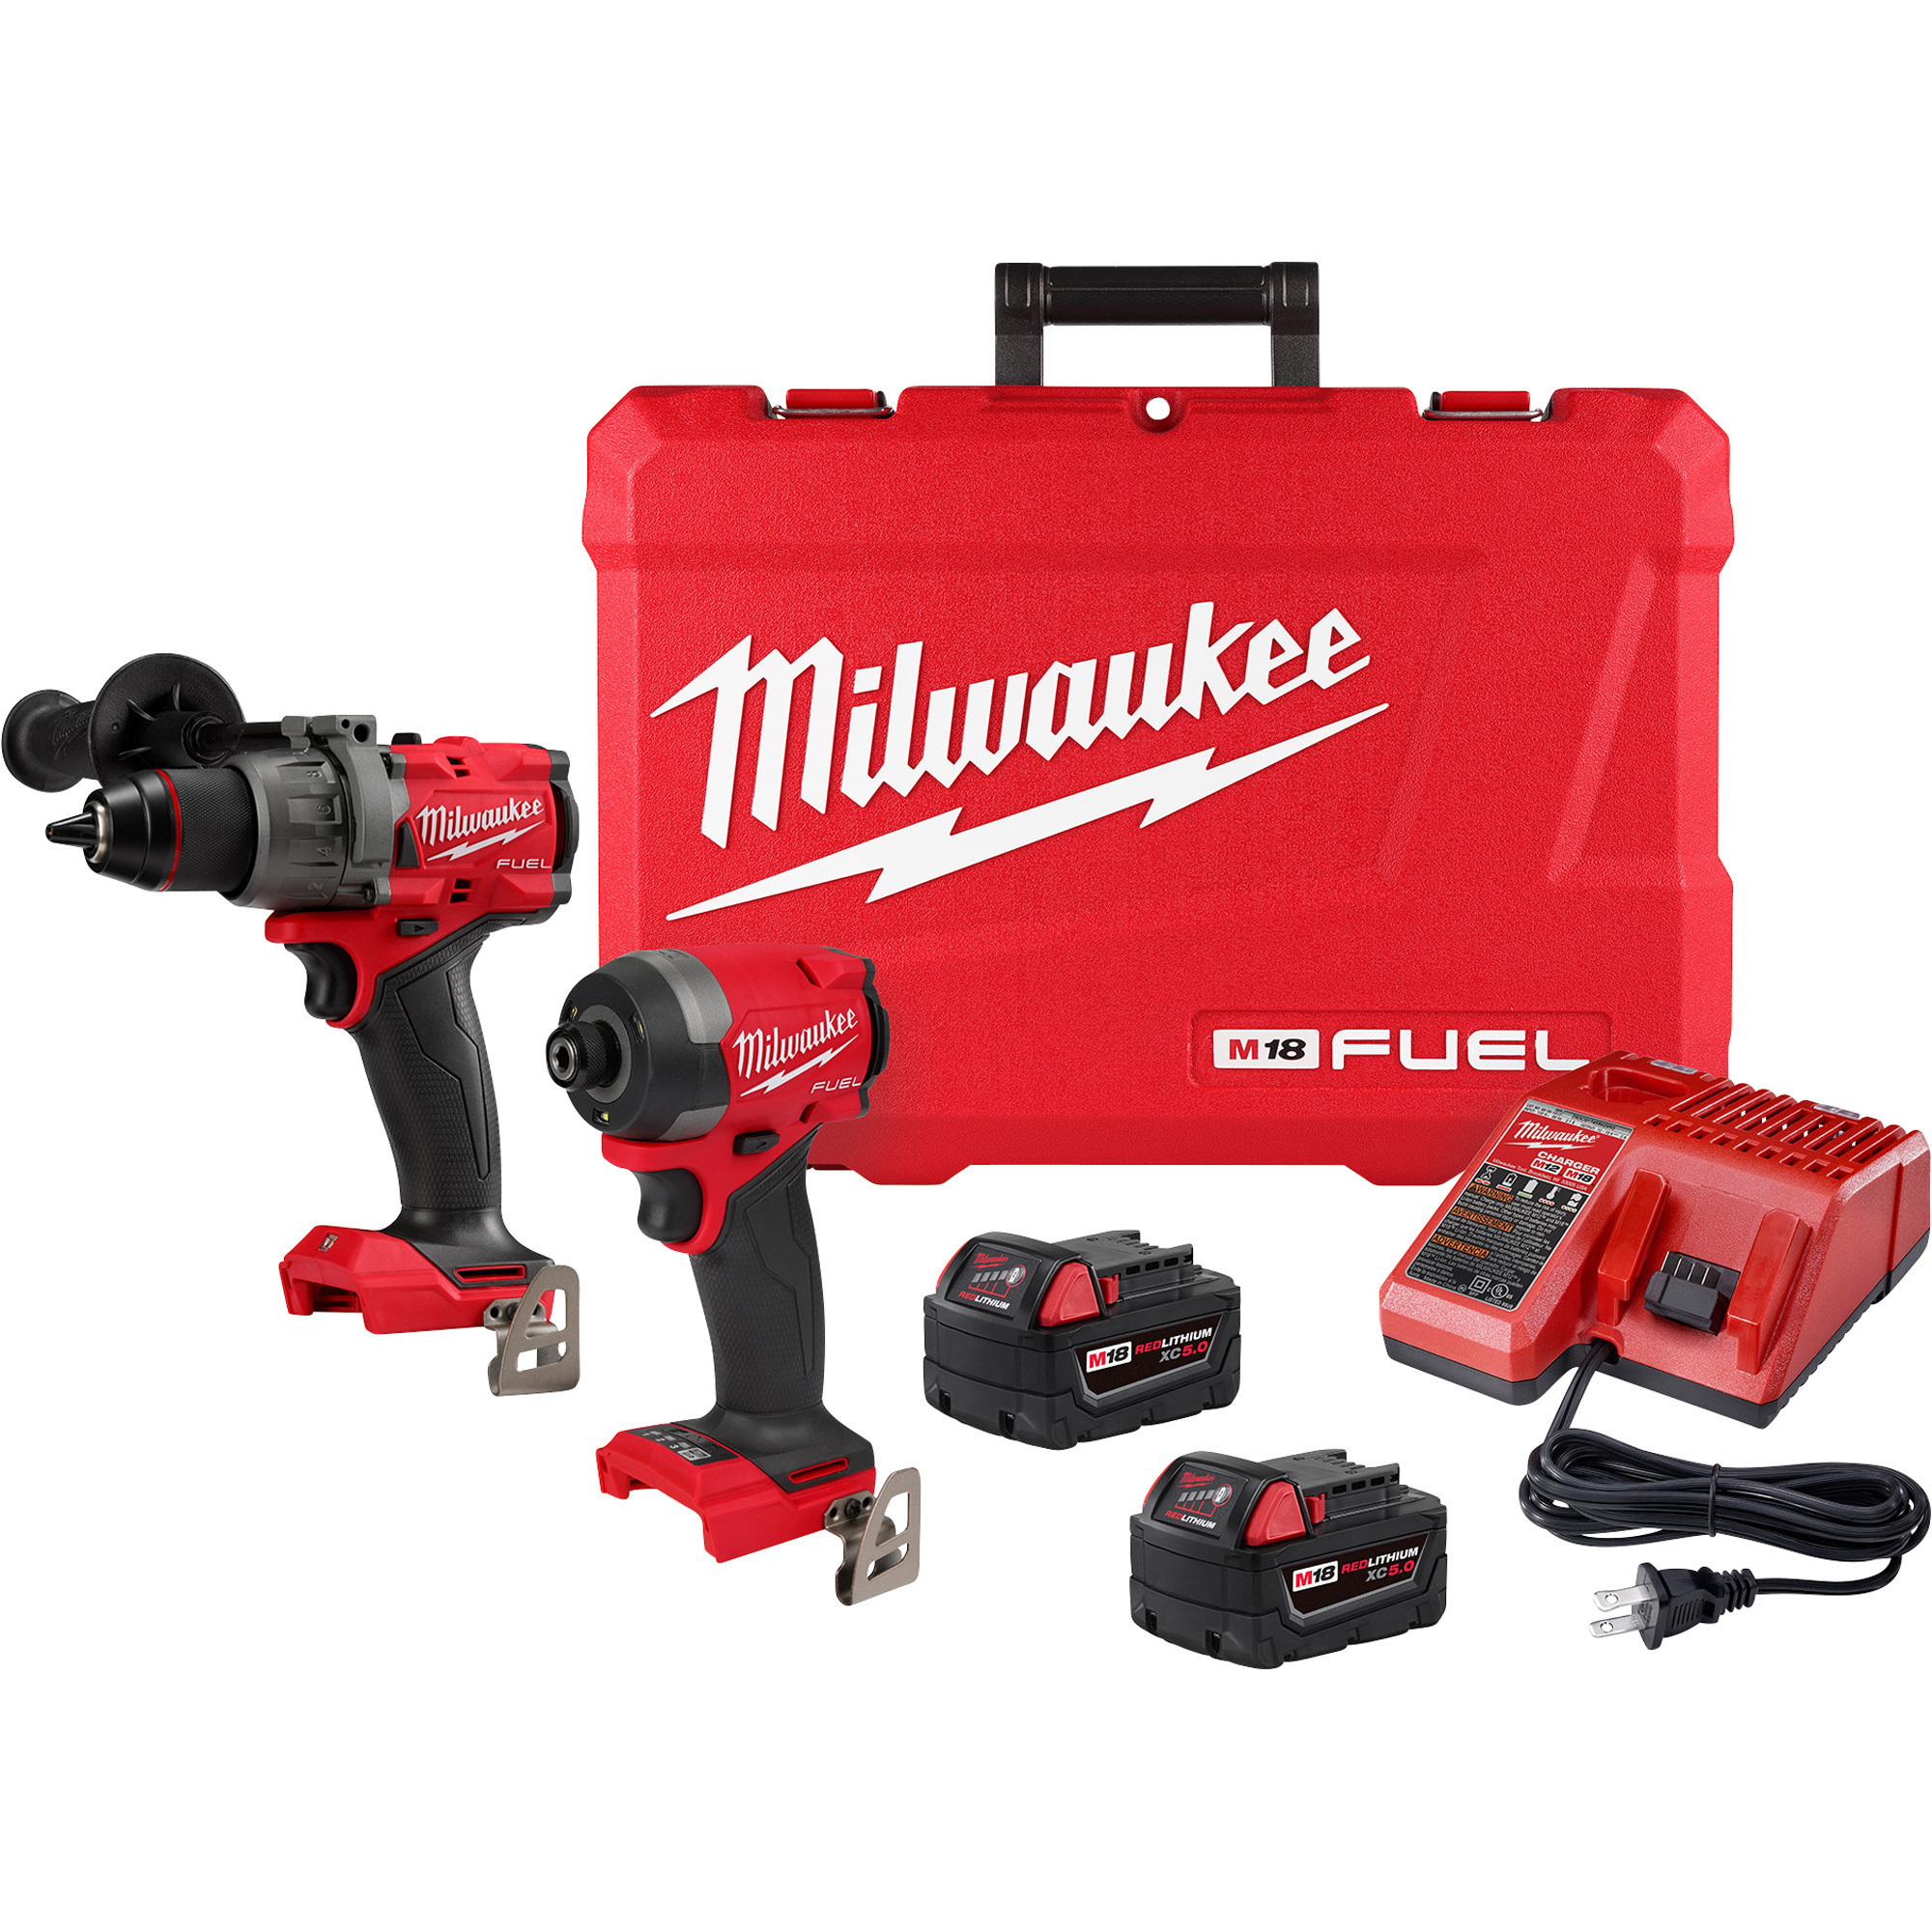 Milwaukee M18 FUEL 2-Tool Combo Kit, 1/2Inch Hammer Drill Driver, 1/4Inch Hex Impact Driver, 2 Batteries, Charger, Model 3697-22